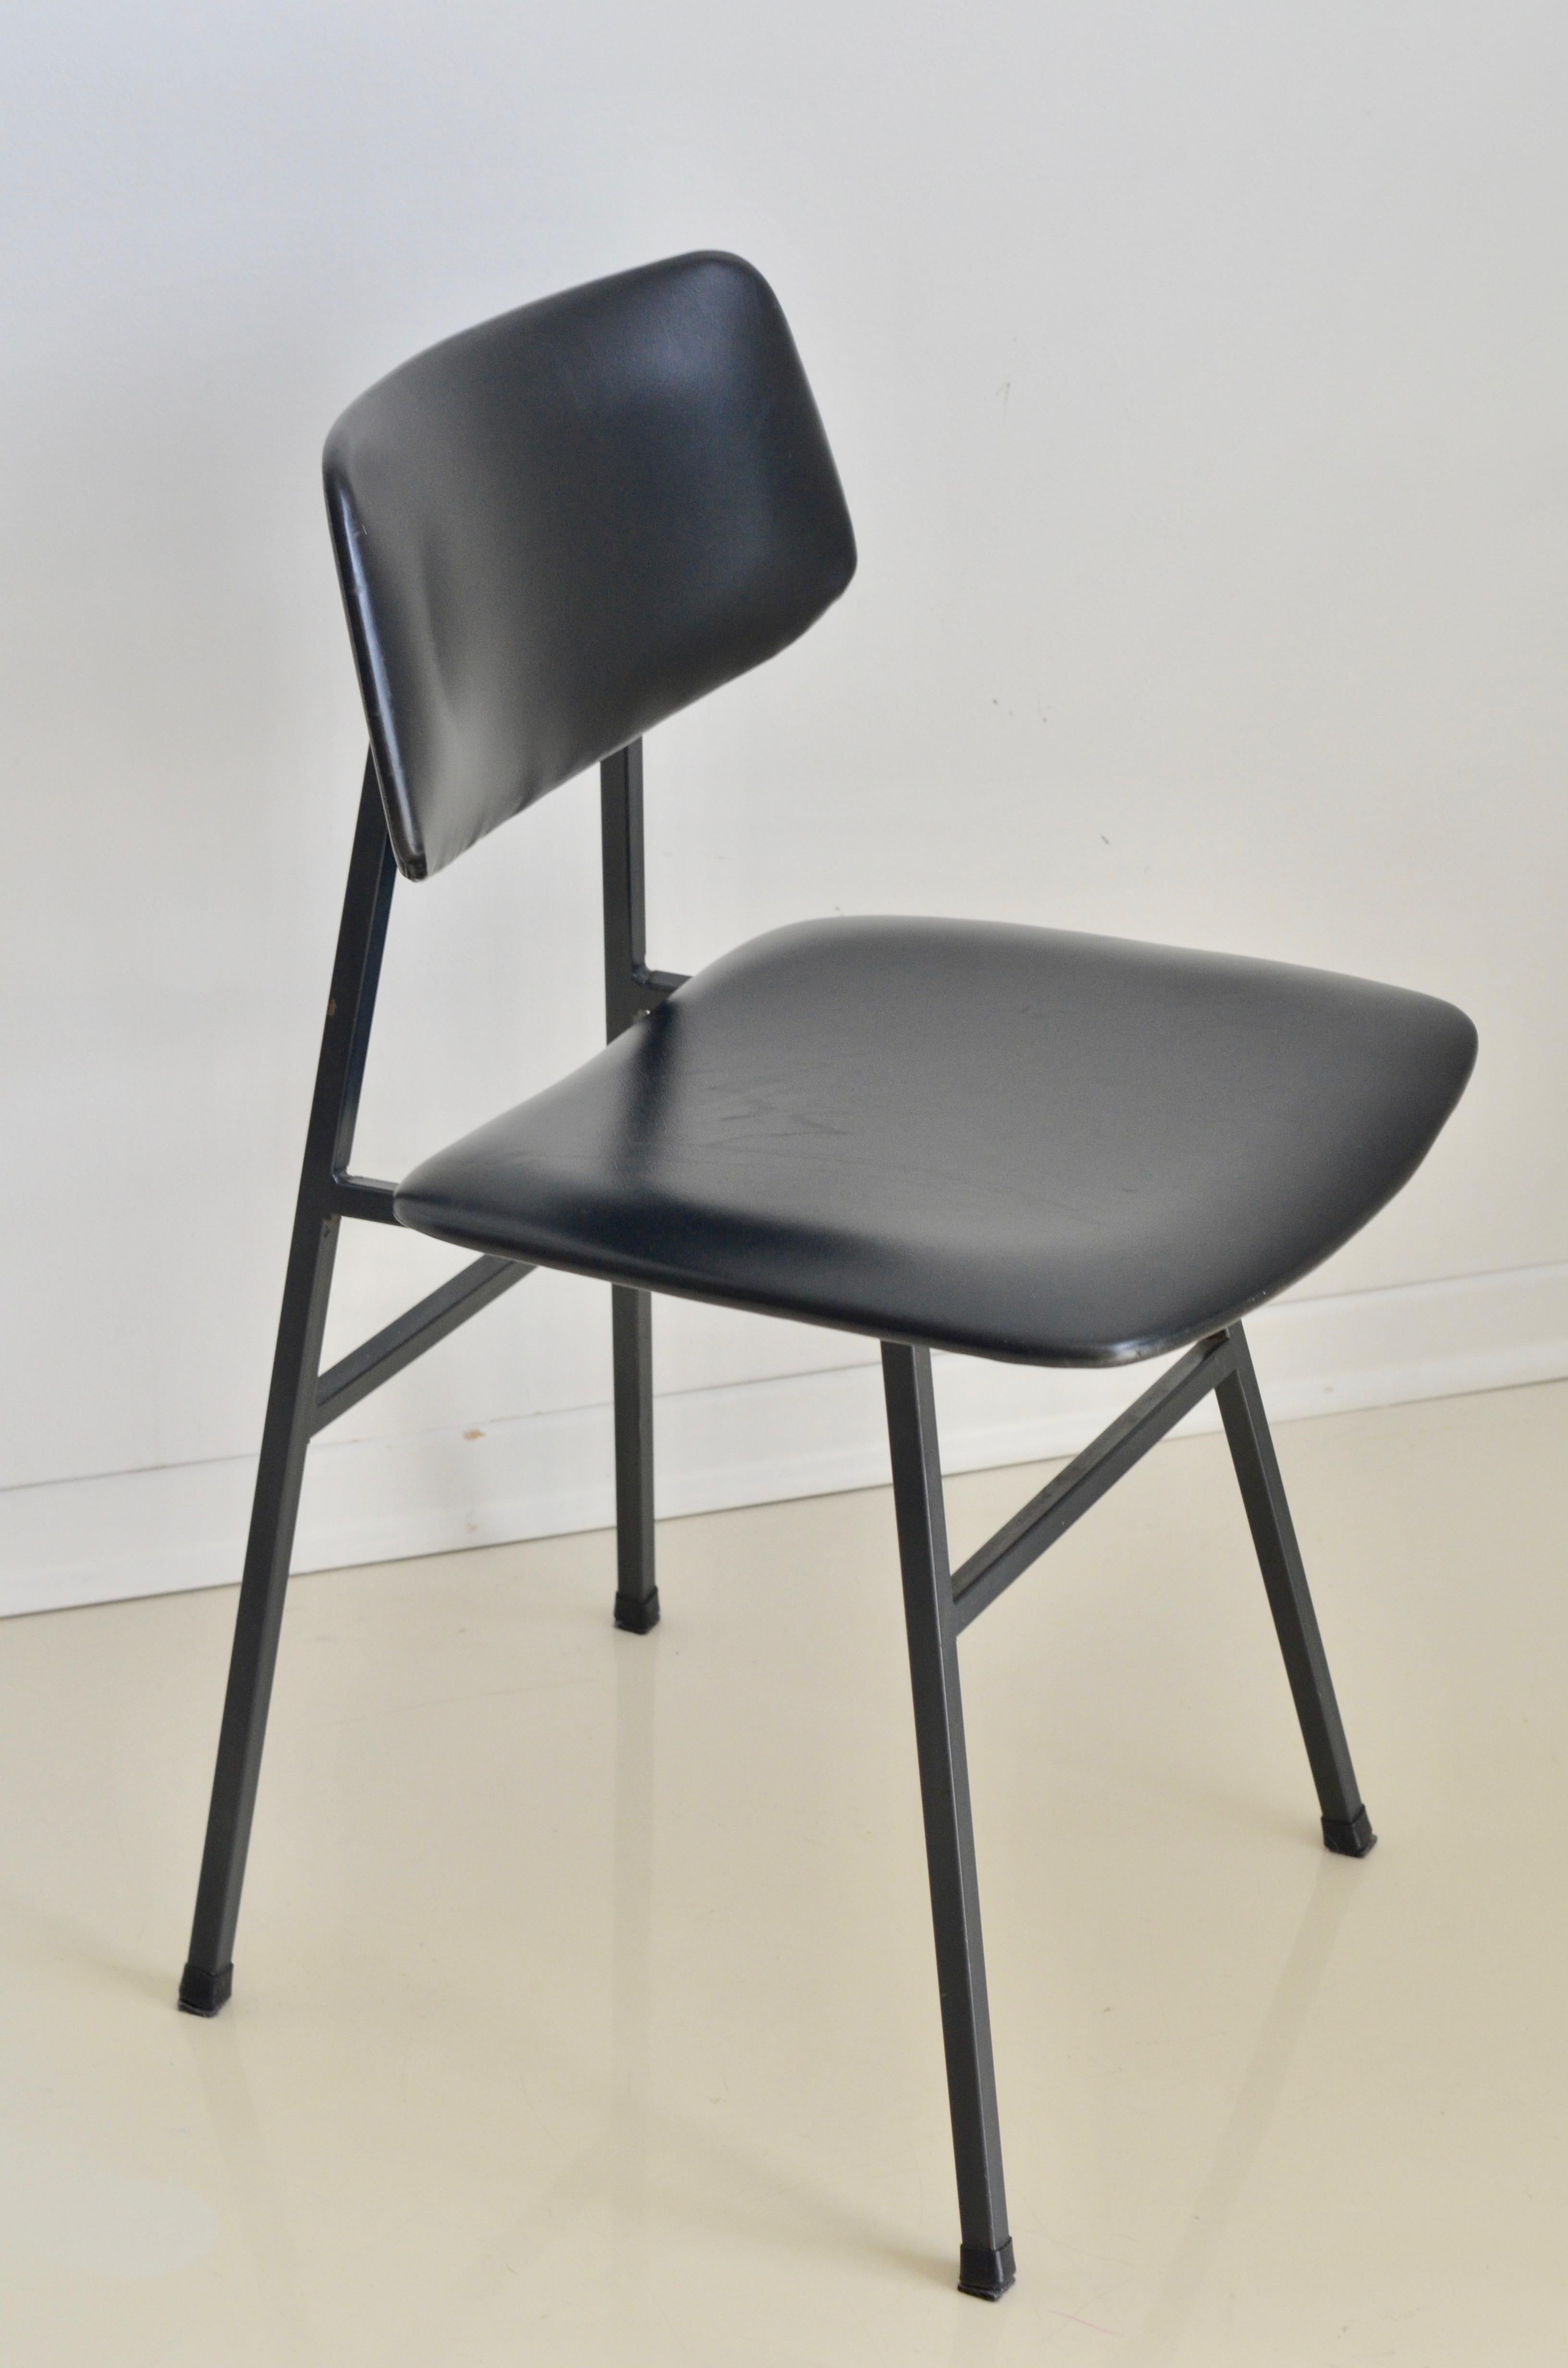 Material: plywood, faux leather, metal

This small yet beautiful chair is perfect example of minimalistic mid century design. Solid metal frame and plywood covered win black faux leather bring elegant esthetics to your home or office.

Producer: